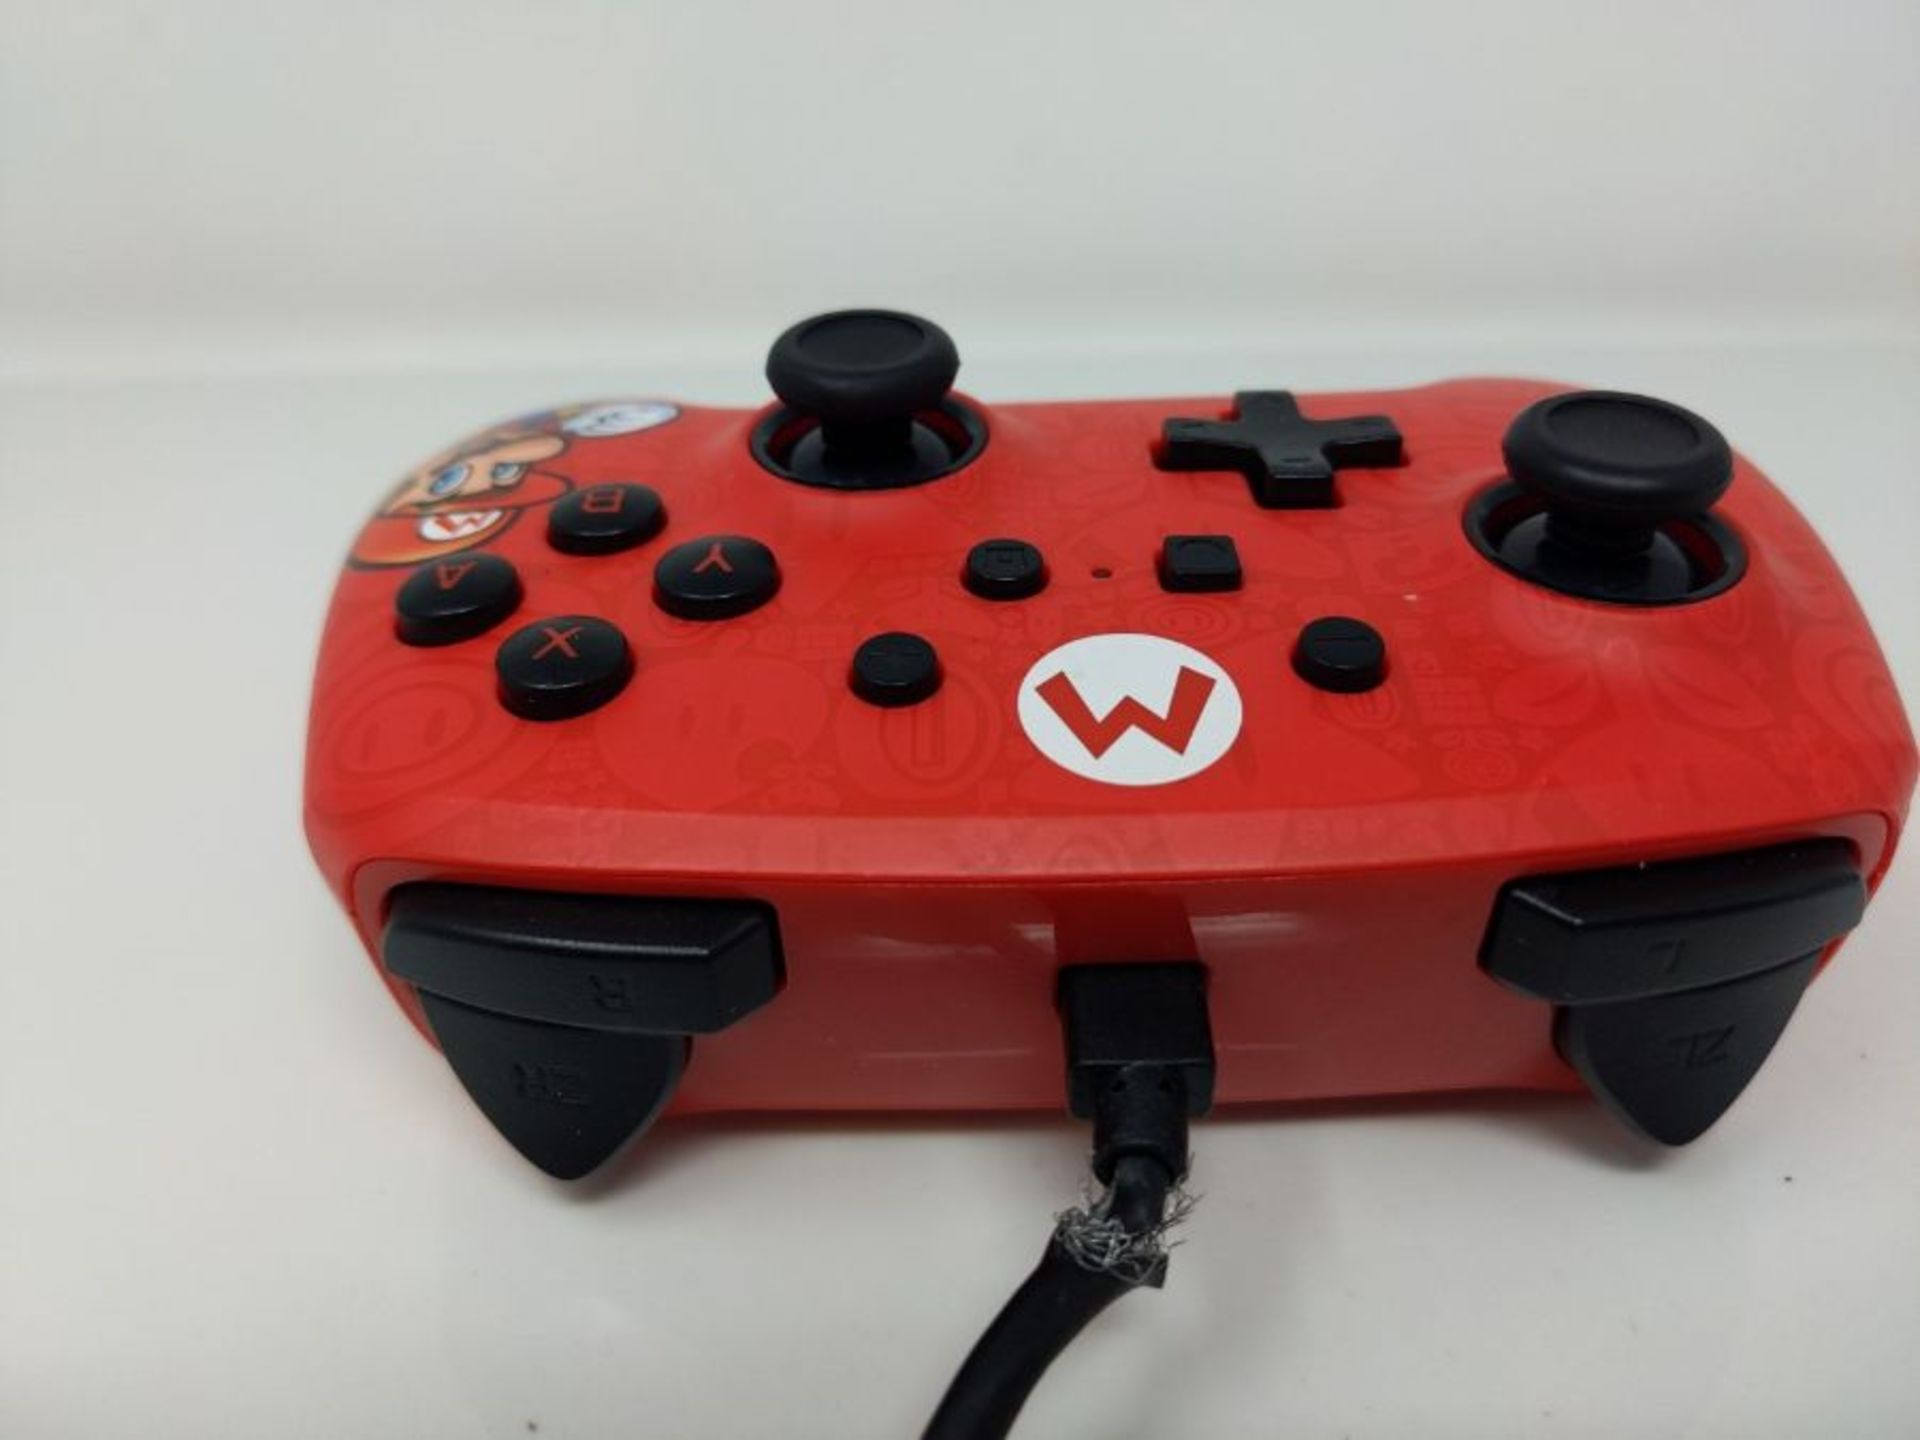 [CRACKED] NSW EnWired Controller Mario - Image 3 of 3